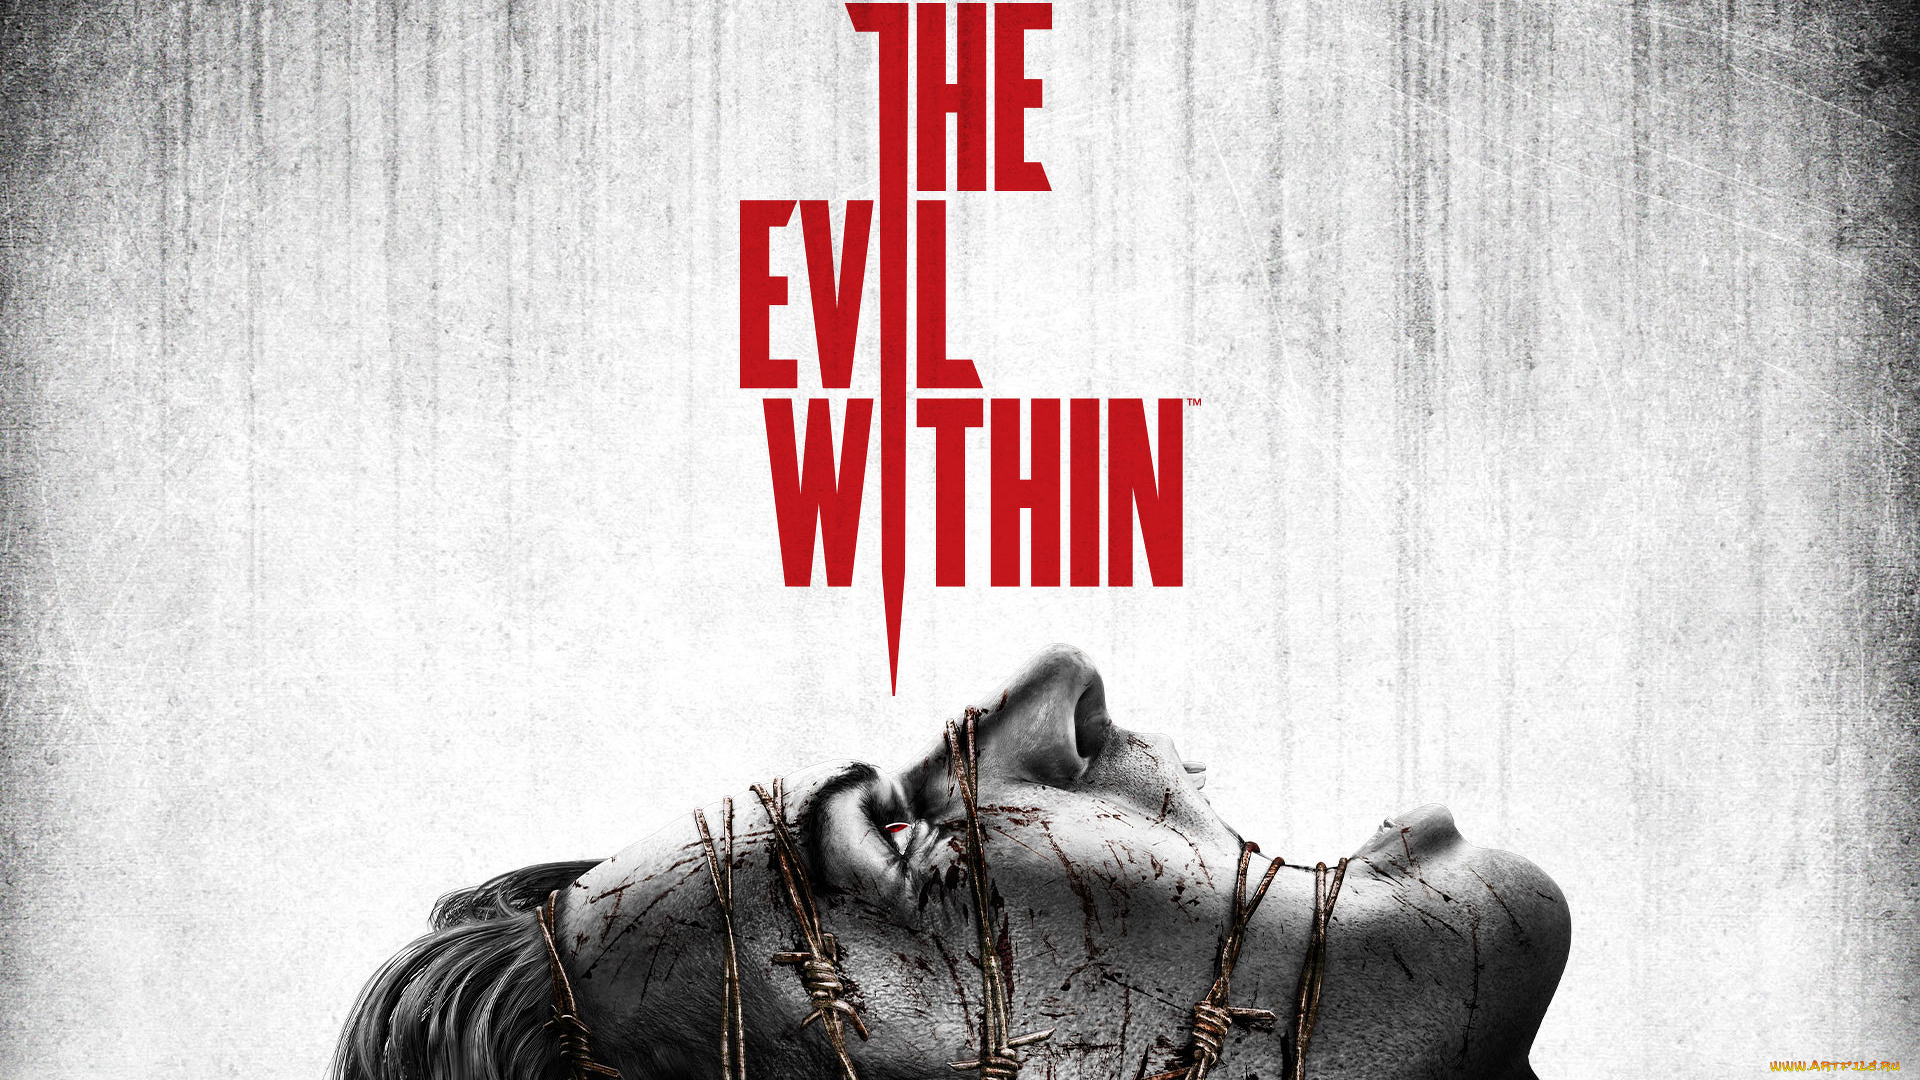 the, evil, within, видео, игры, -, the, evil, within, horror, the, within, evil, survival, игра